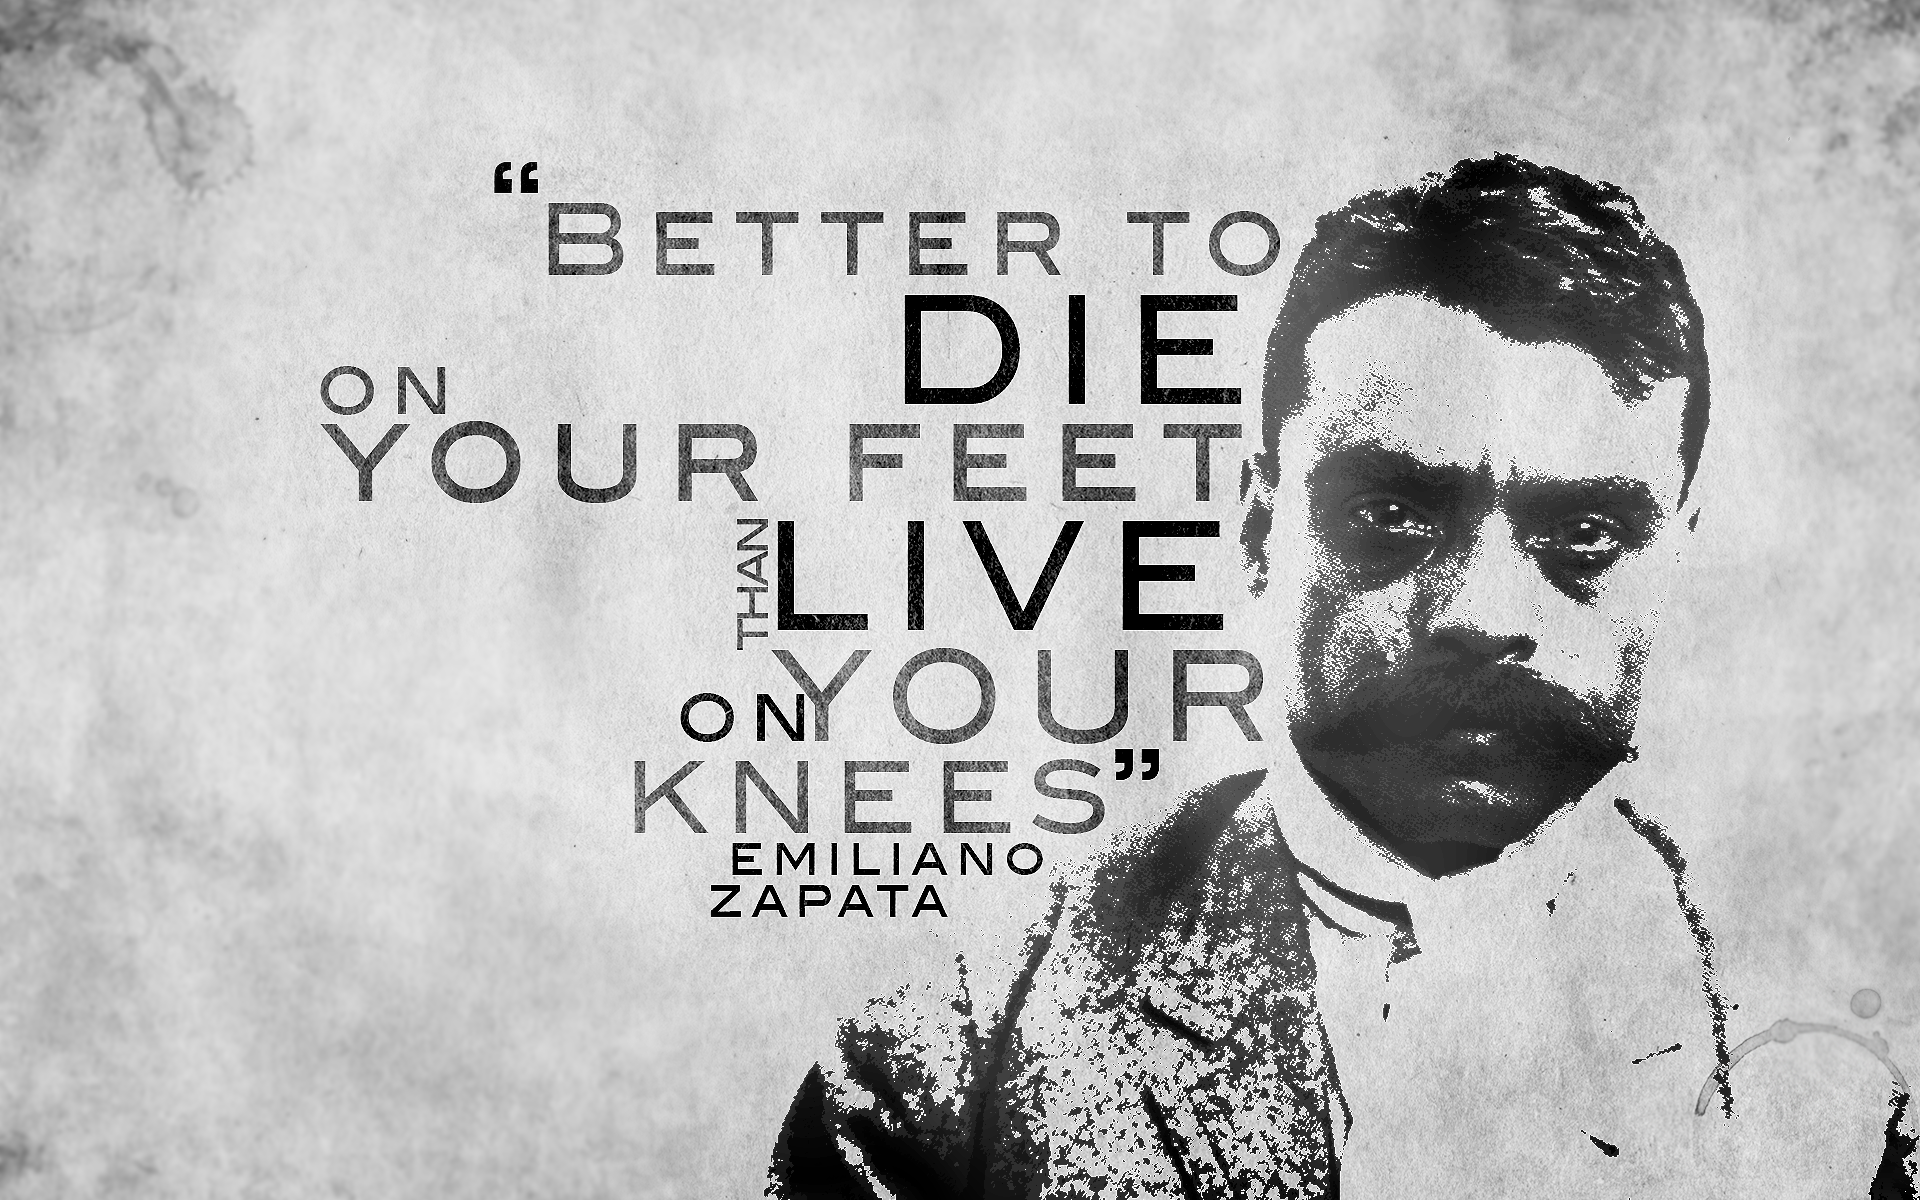 31__emiliano_zapata_by_sfegraphics-d4vspgr.png